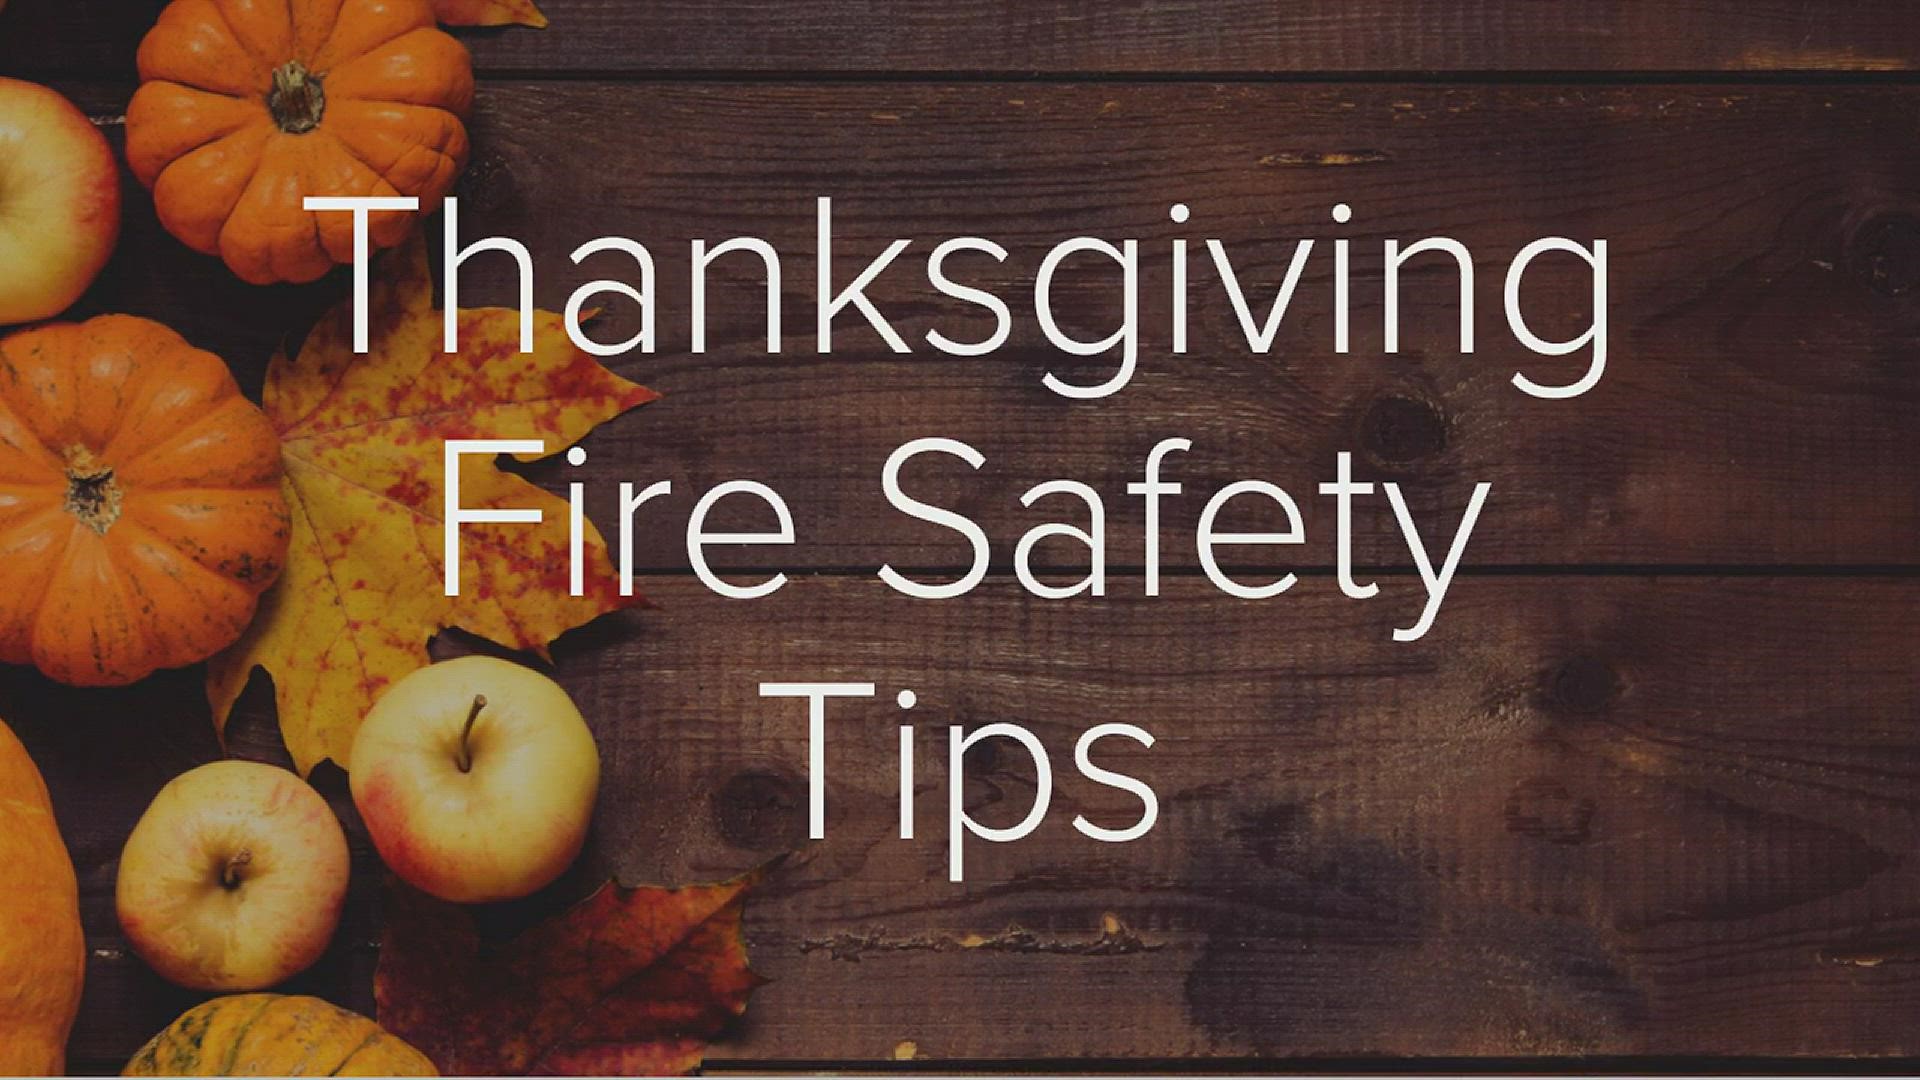 Thanksgiving is the leading day in the United States for home cooking fires.